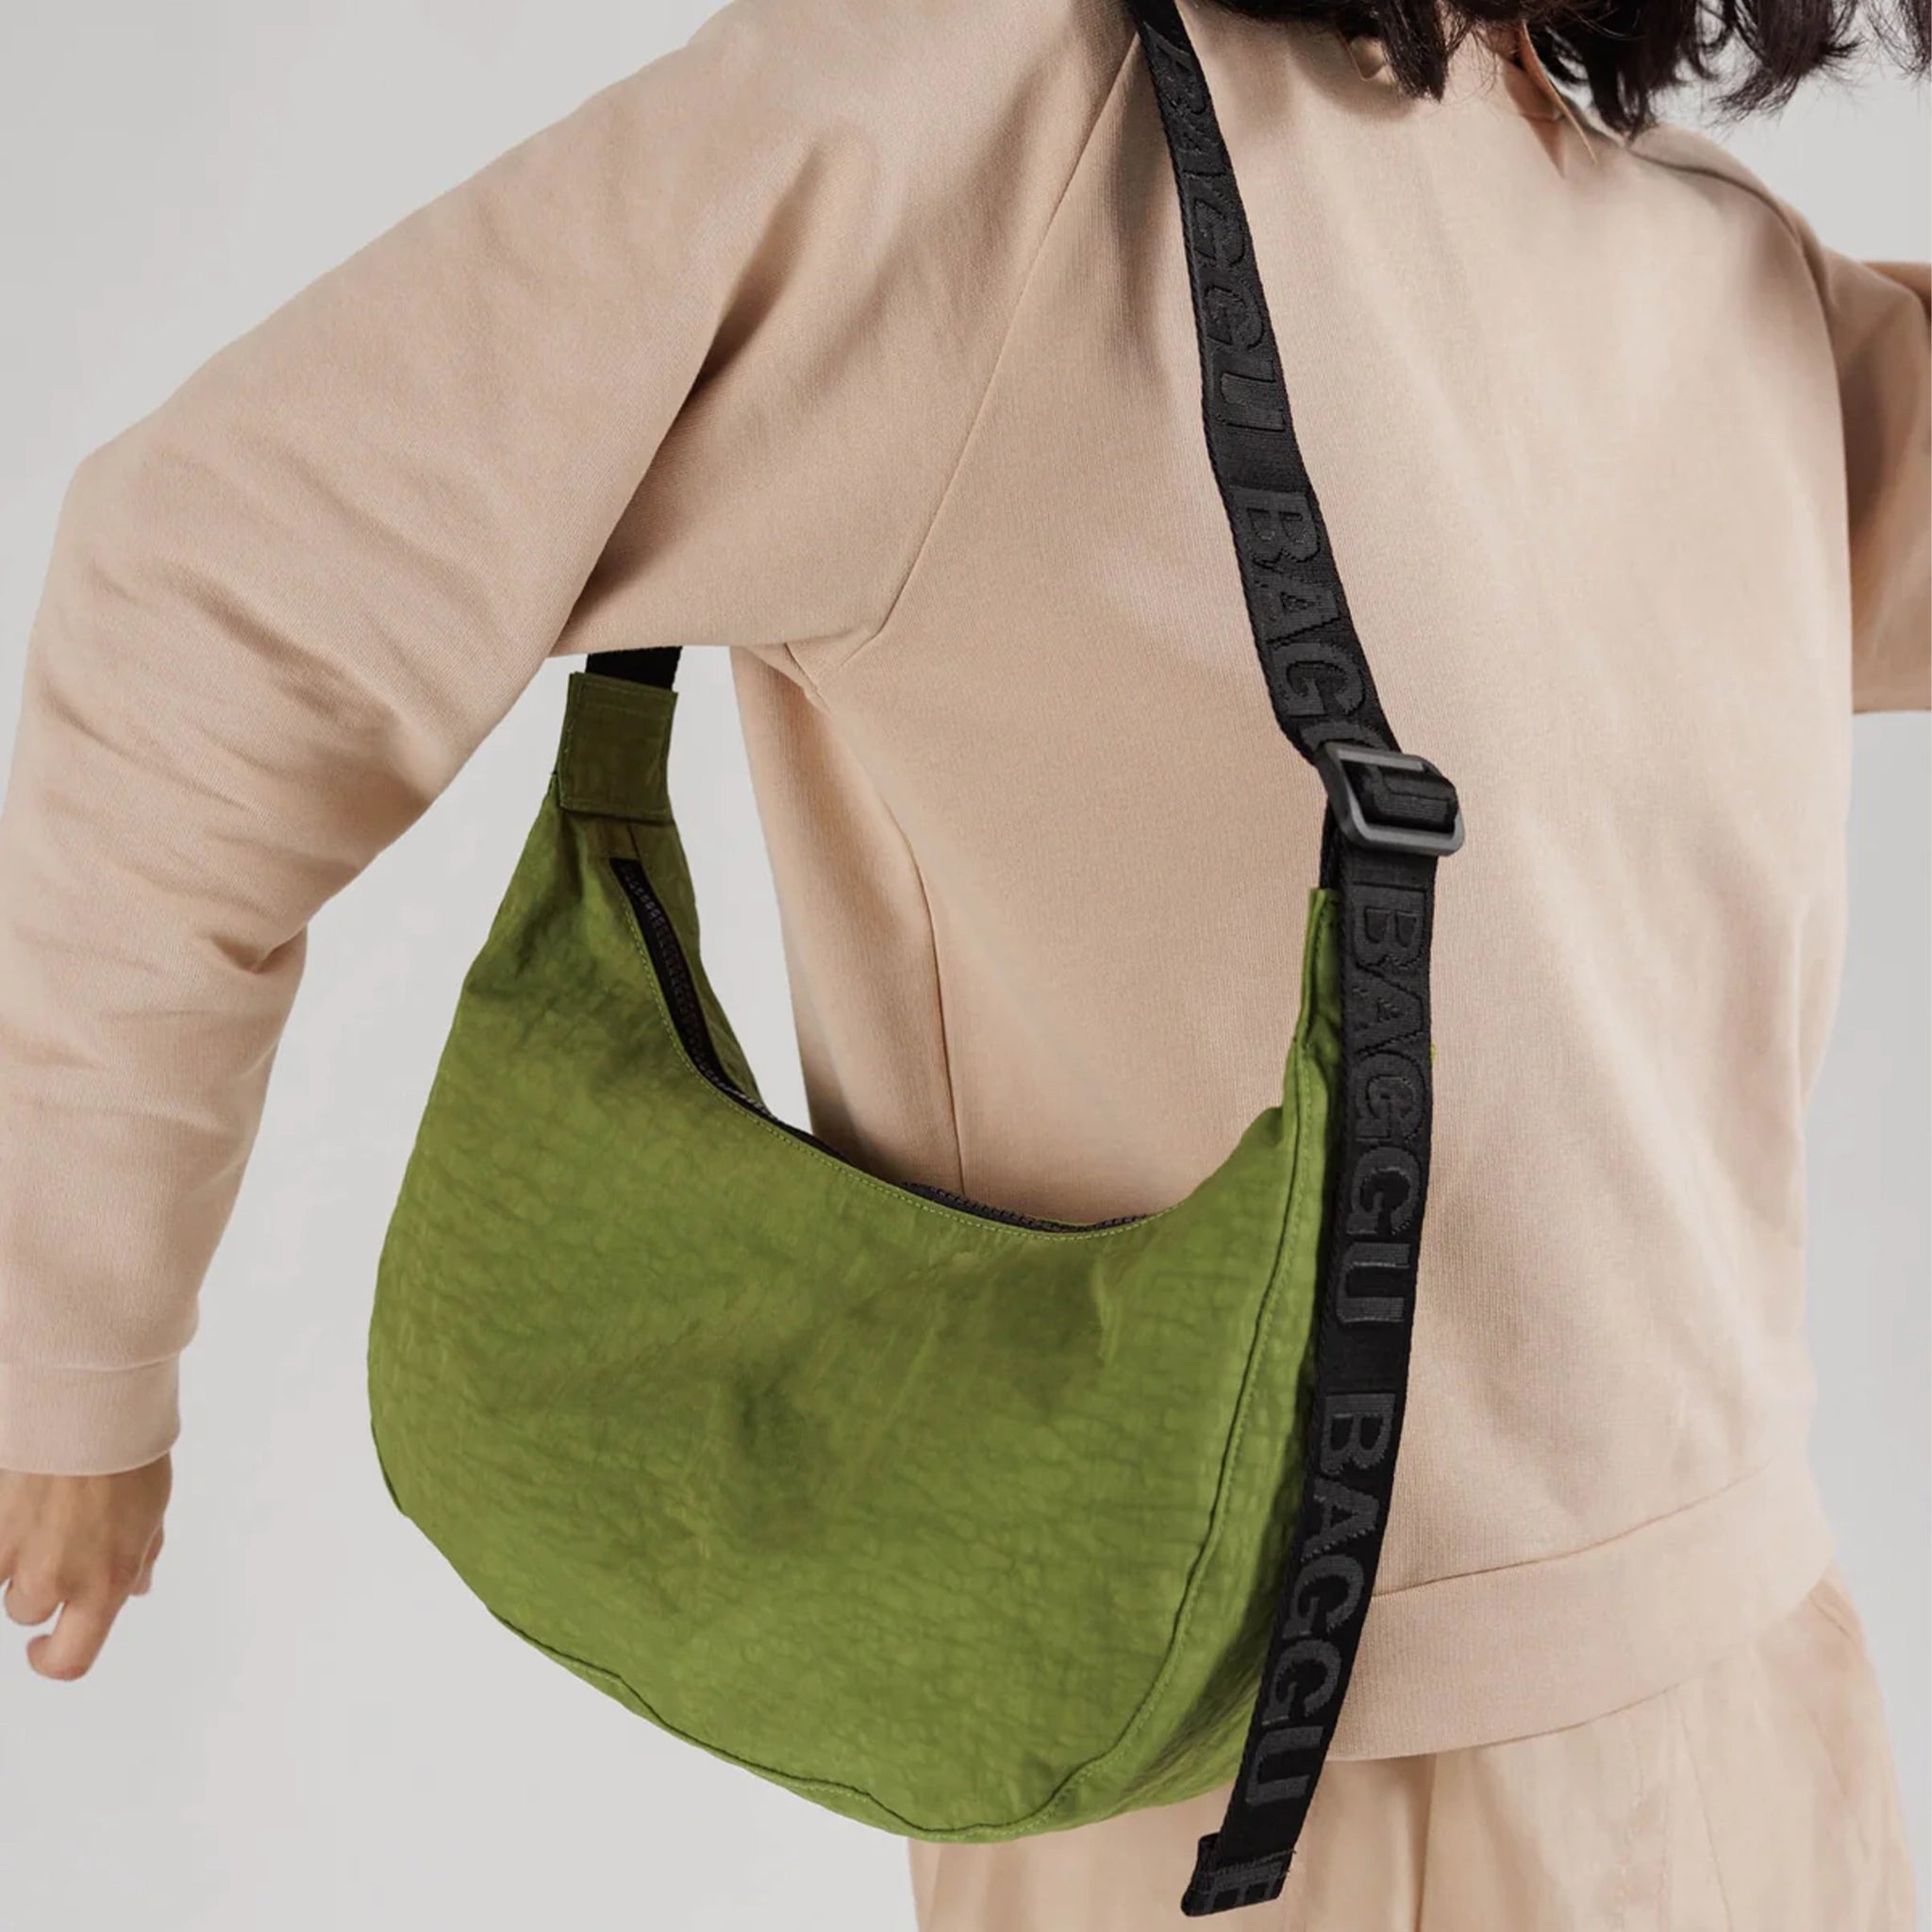 A vibrant green nylon crescent shaped bag with an adjustable black strap that reads, "BAGGU" repeated on the strap and a single zipper.